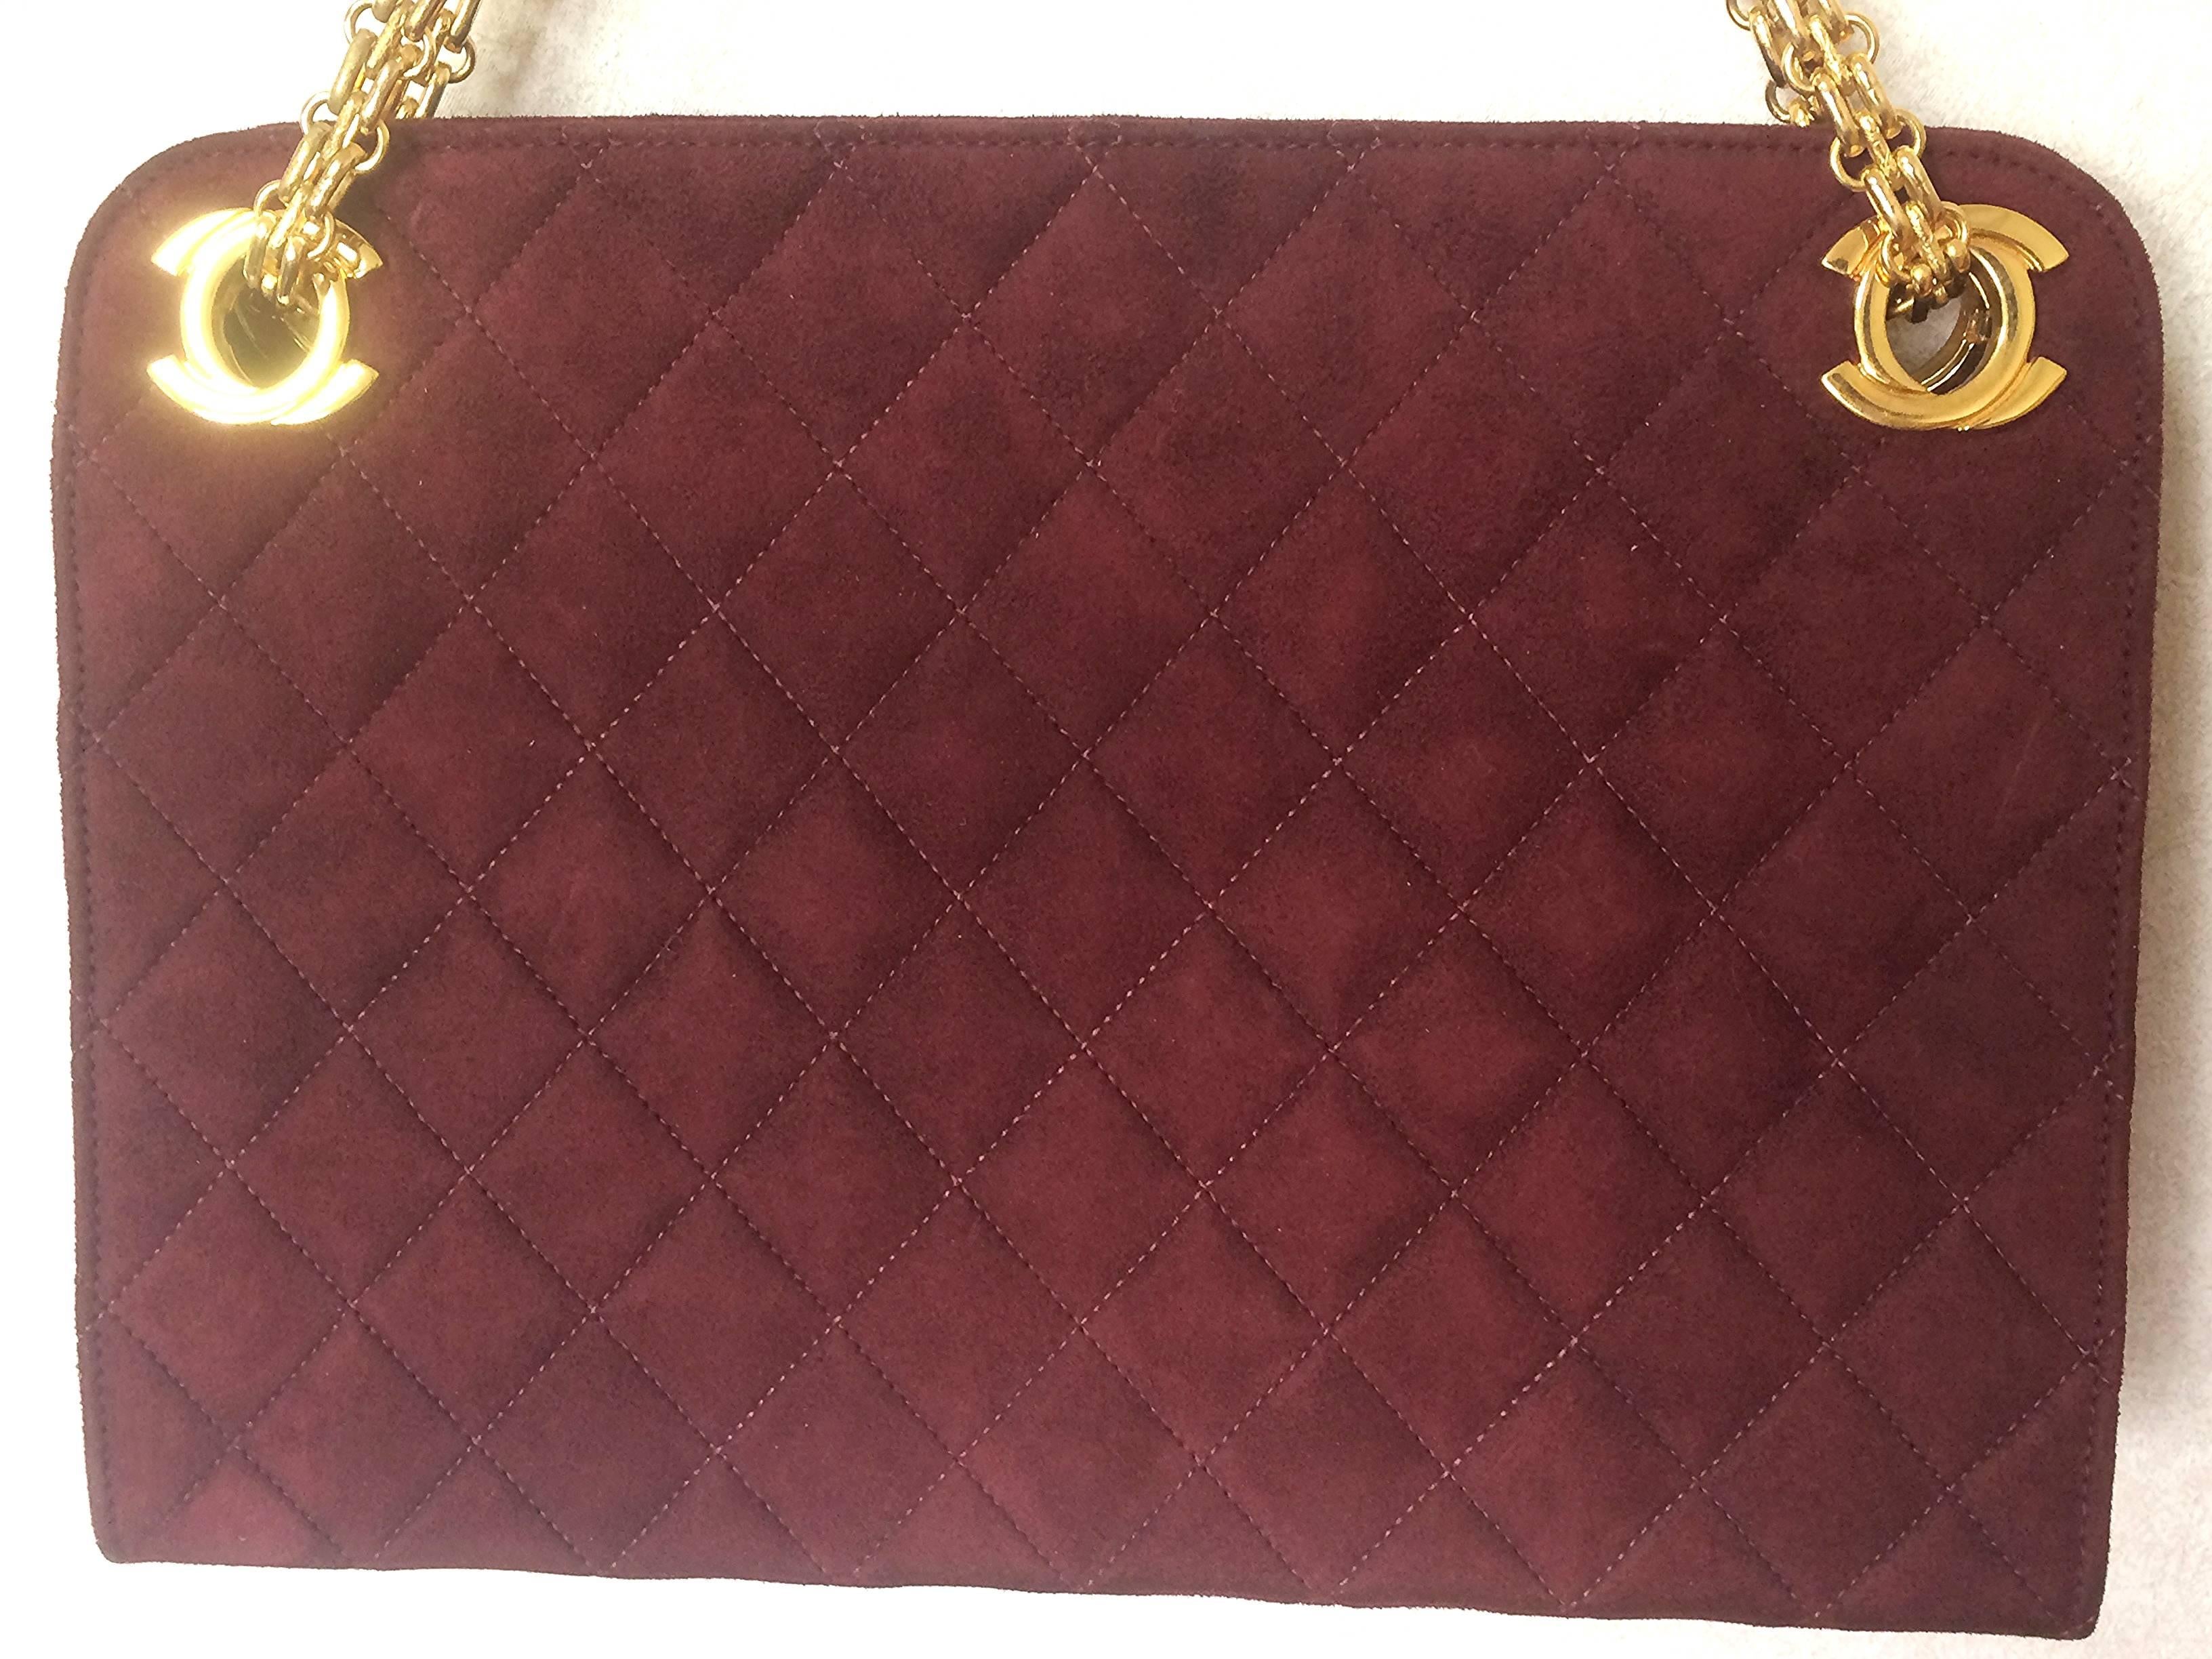 1980s. Vintage CHANEL genuine wine, bordeaux suede leather  shoulder bag with gold tone CC marks and skinny chain straps. Rare masterpiece.

Introducing a rare vintage bag, genuine wine/bordeaux suede leather shoulder bag with gold chain strap